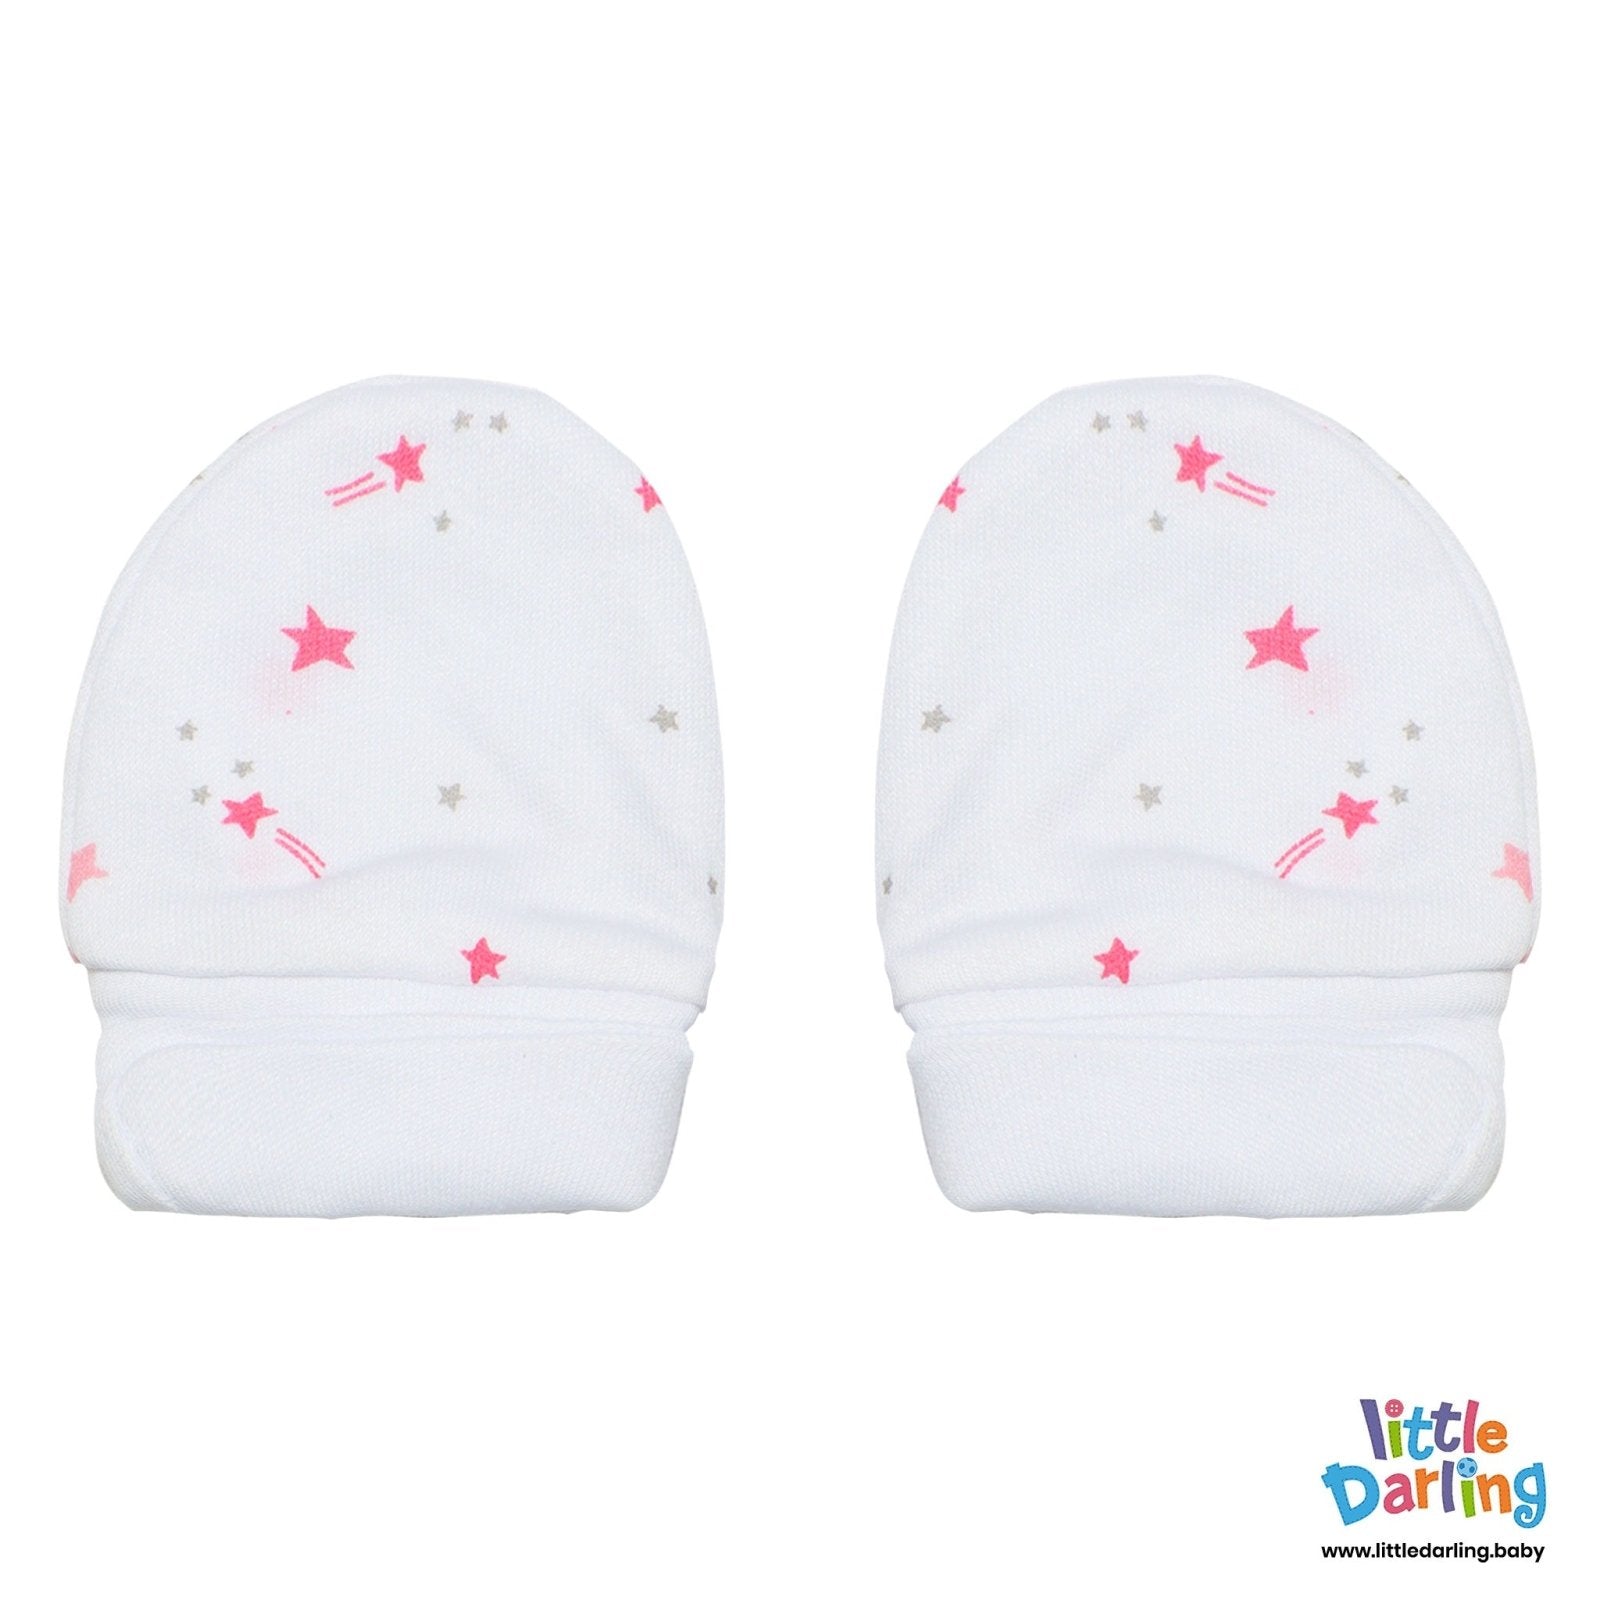 Baby Mittens Pair Pk Of 2  Star Print by Little Darling